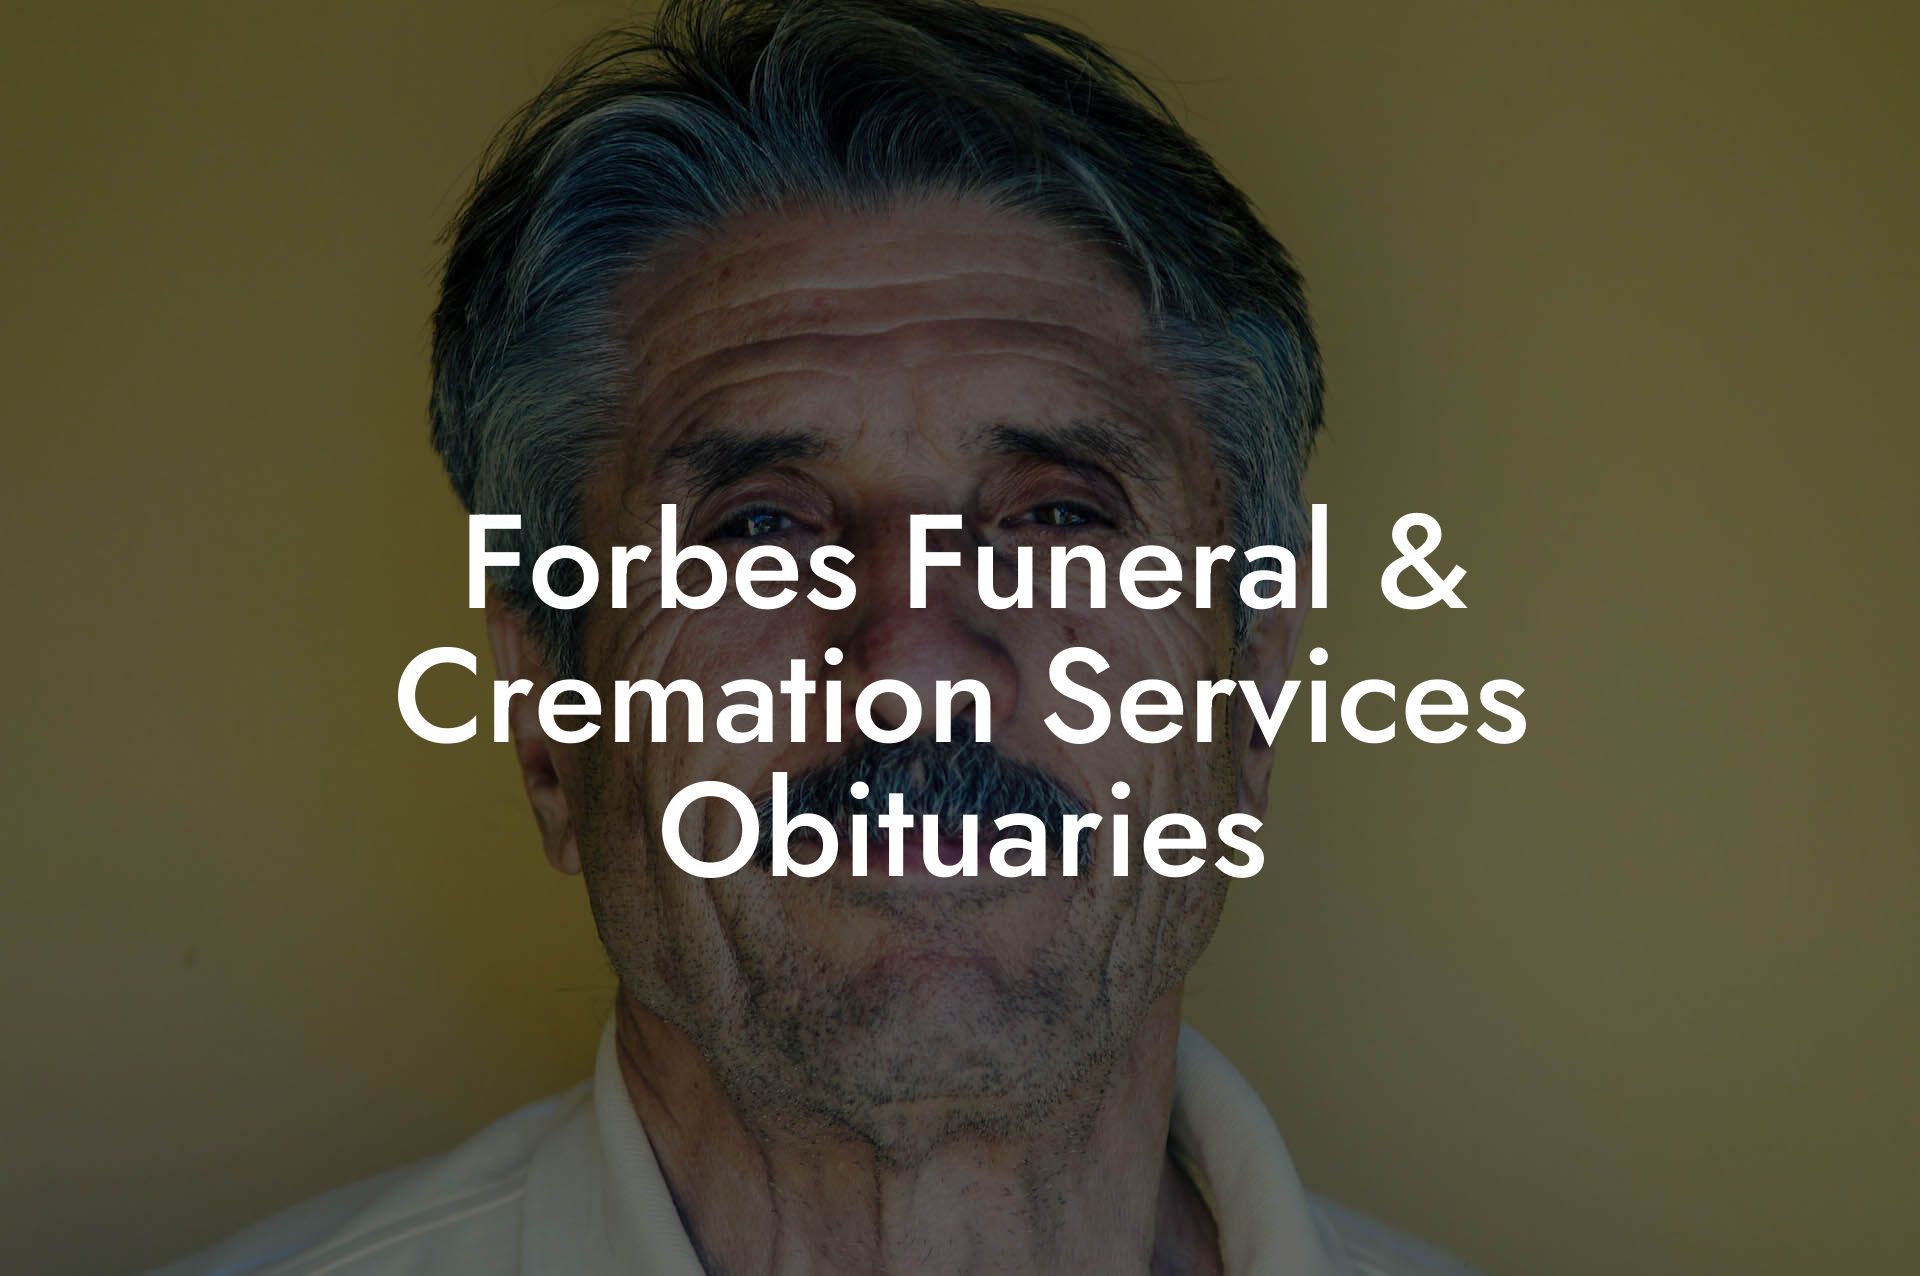 Forbes Funeral & Cremation Services Obituaries